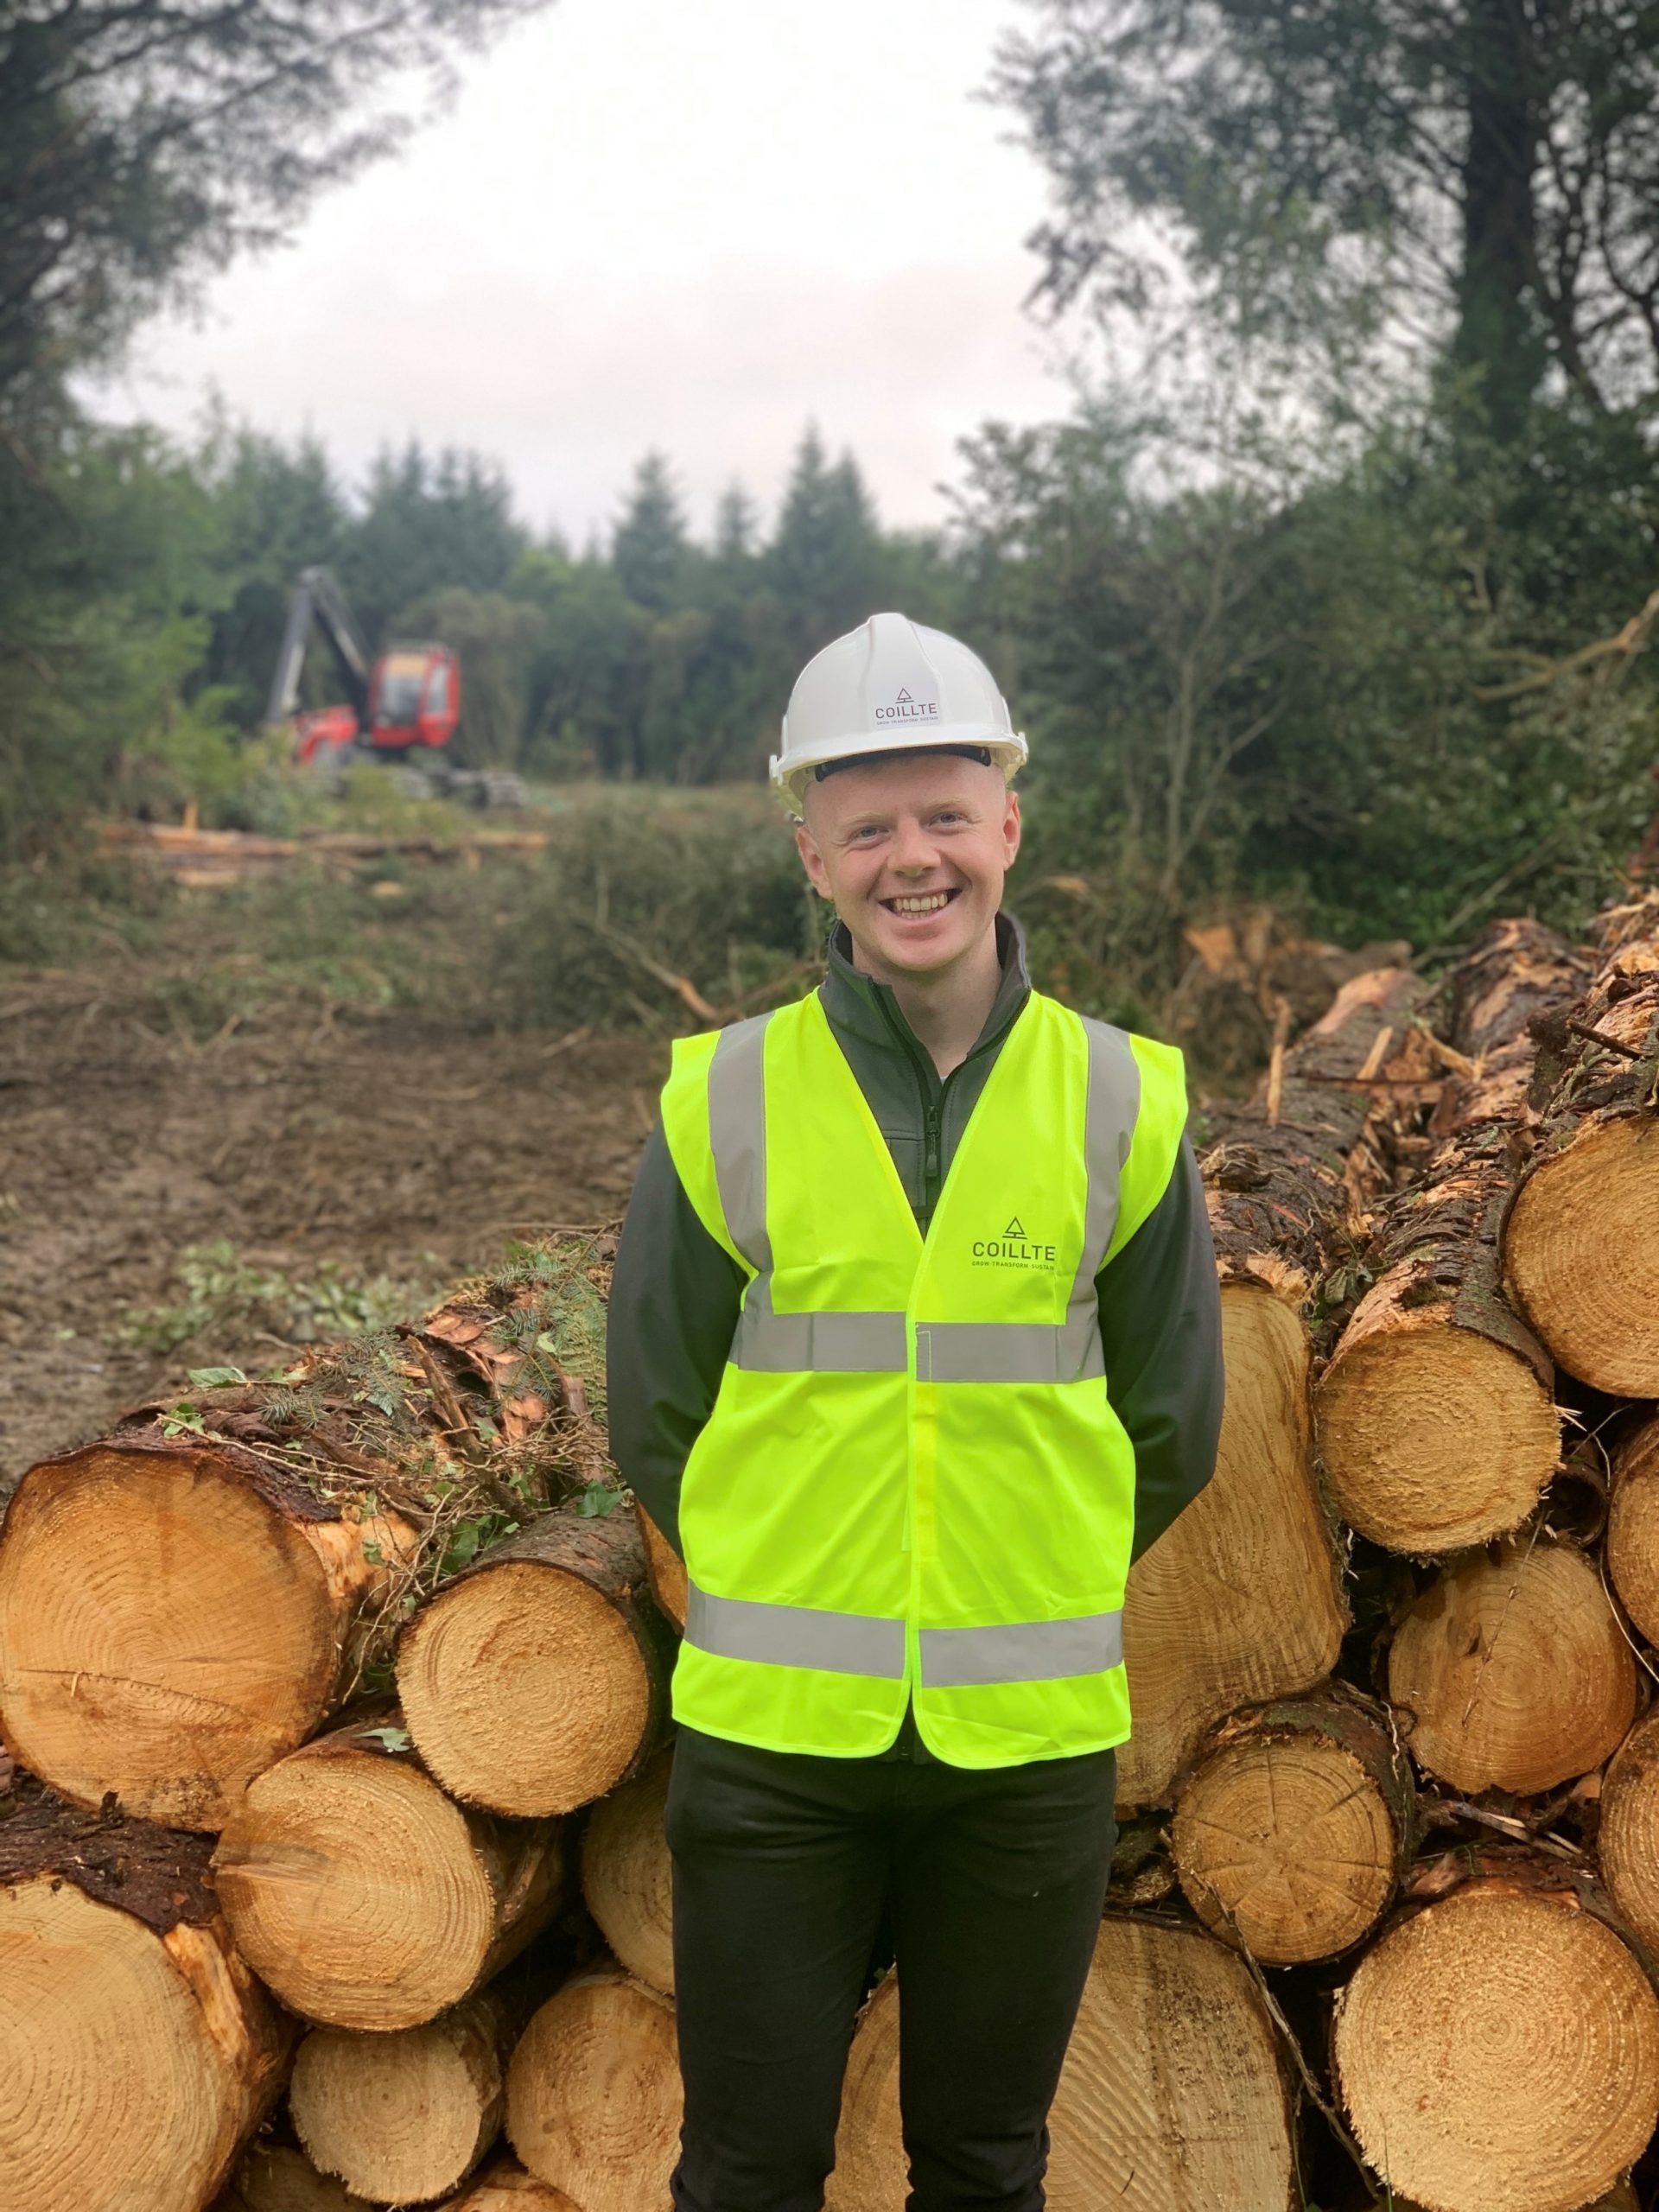 Picture of Coillte graduate Mark Murphy in high vis jacket and hard hat standing in front of a stack of harvested logs in a forest.